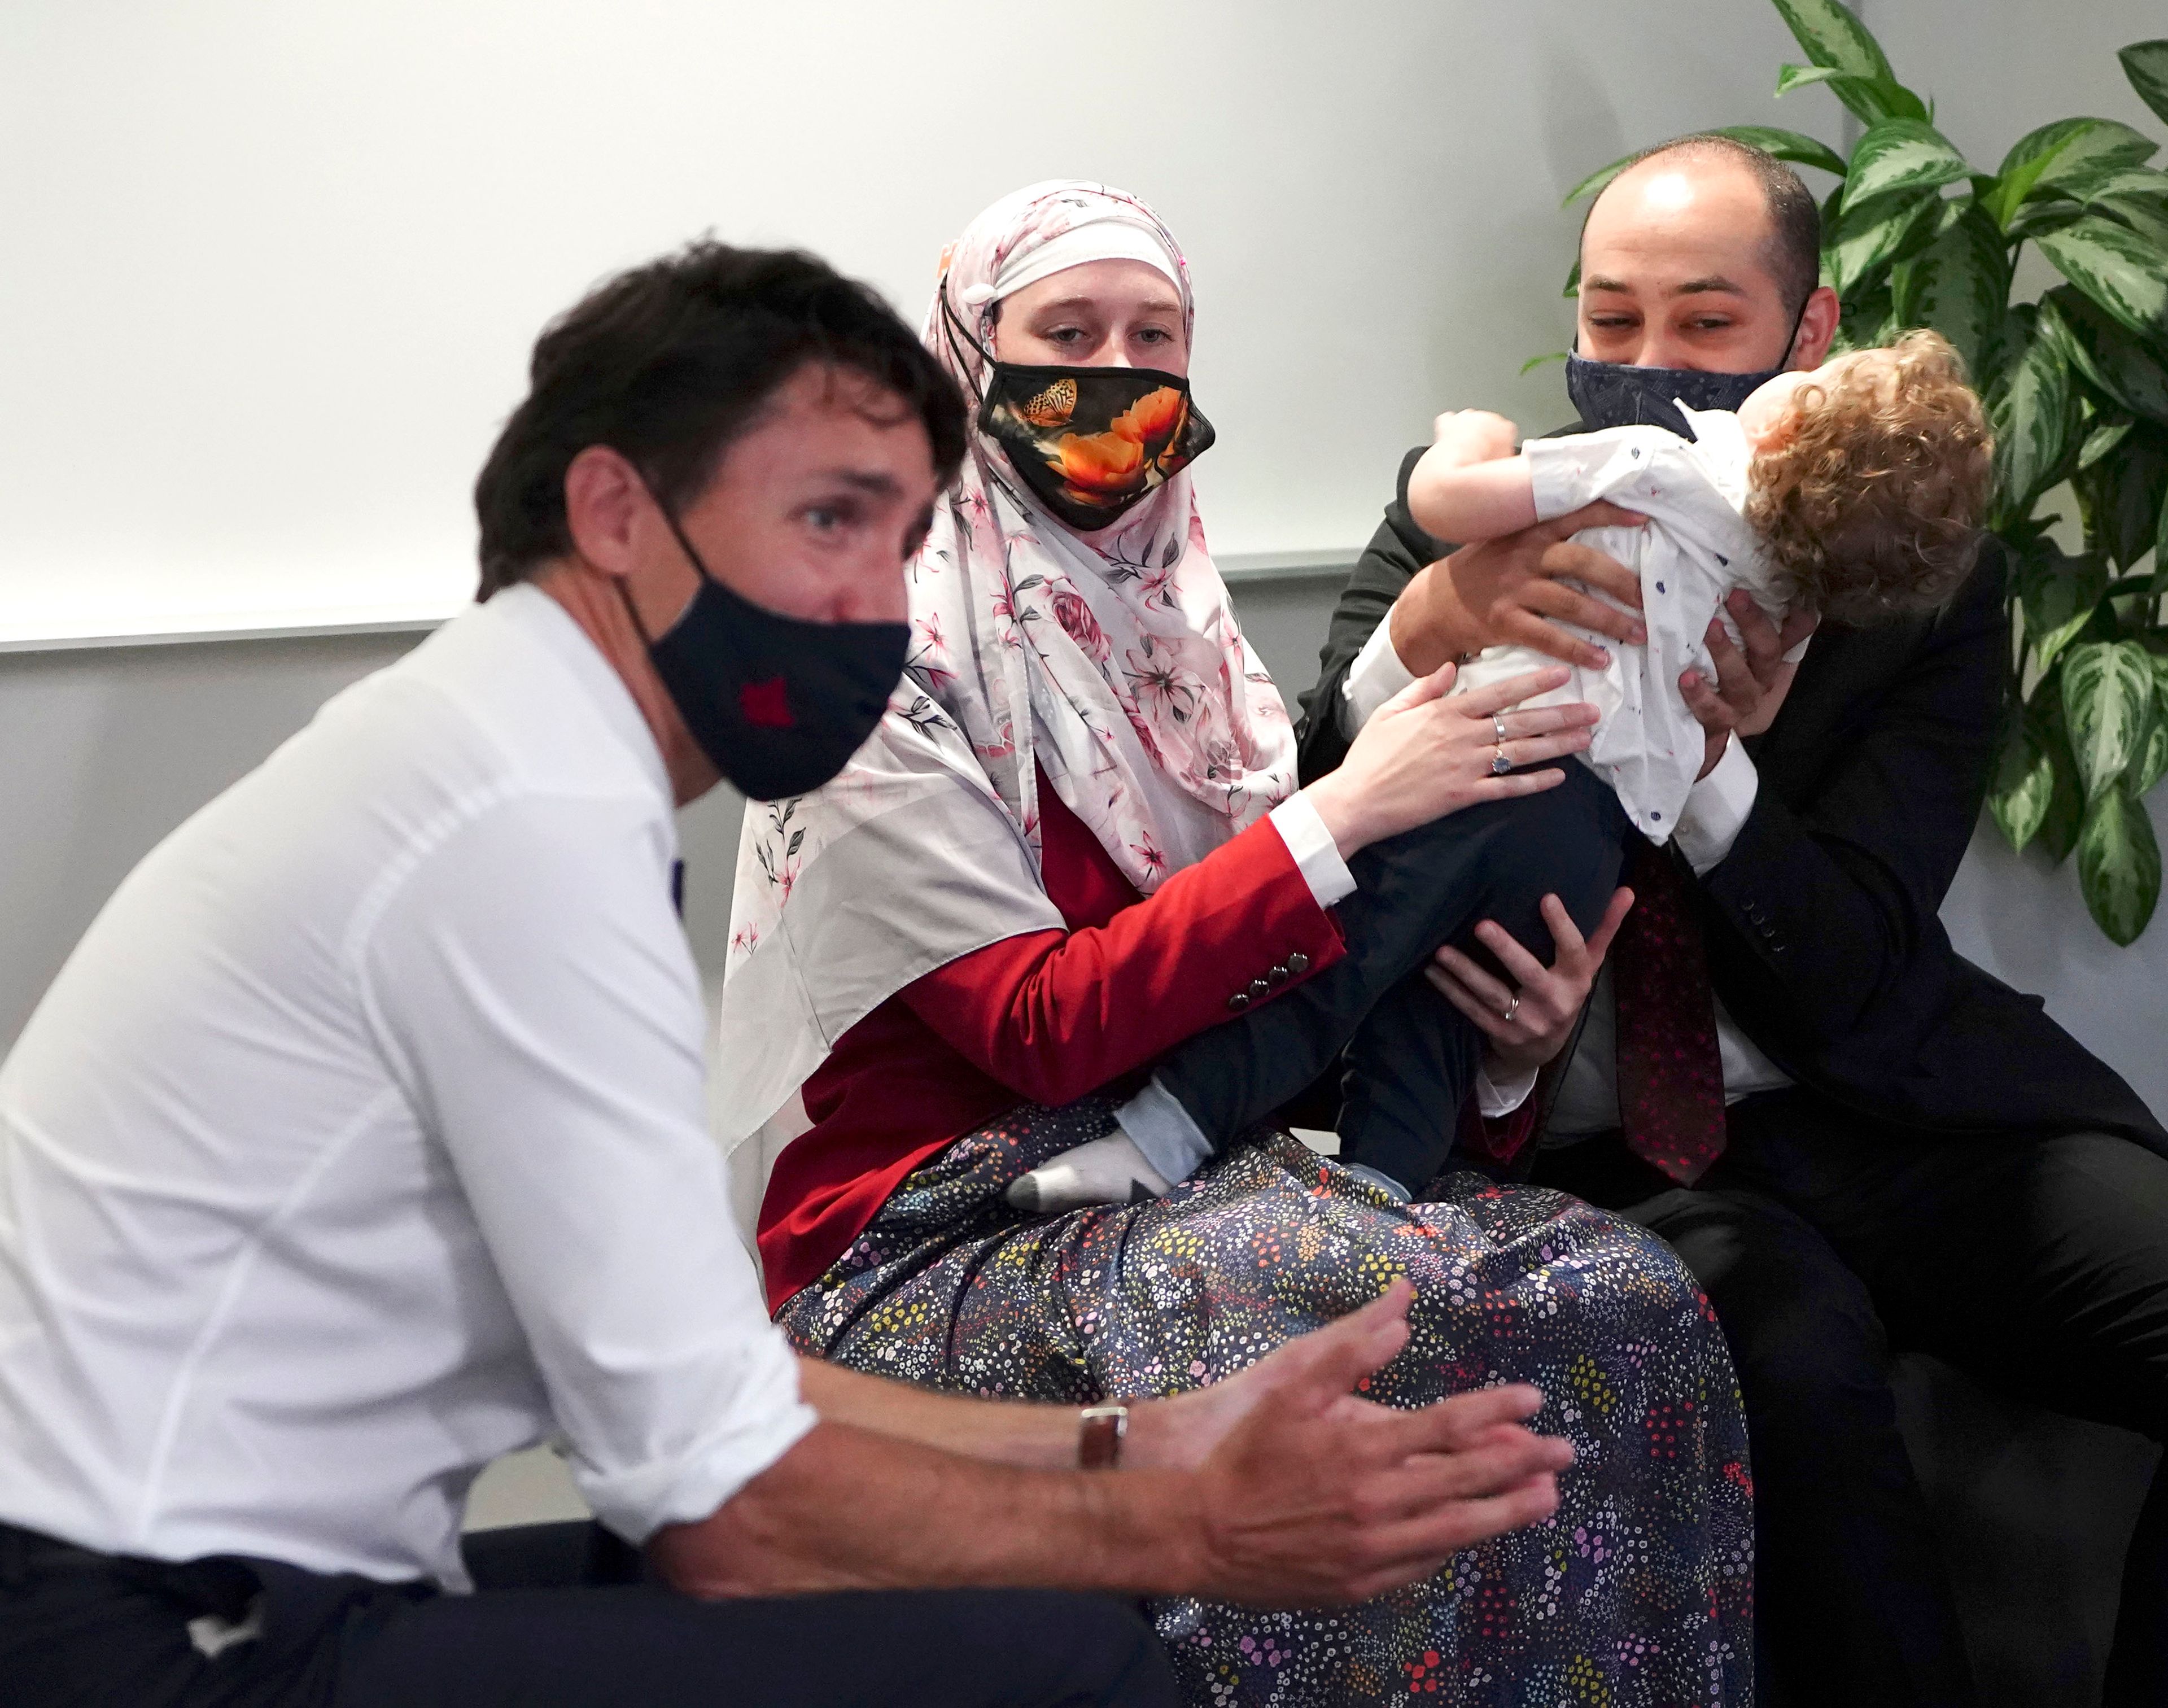 Liberal Leader Justin Trudeau meets with a family and physicians to discuss the difficulties in finding a family doctor as he makes a campaign stop in Halifax, N.S., on Monday, Aug 23, 2021. (Sean Kilpatrick/CP)